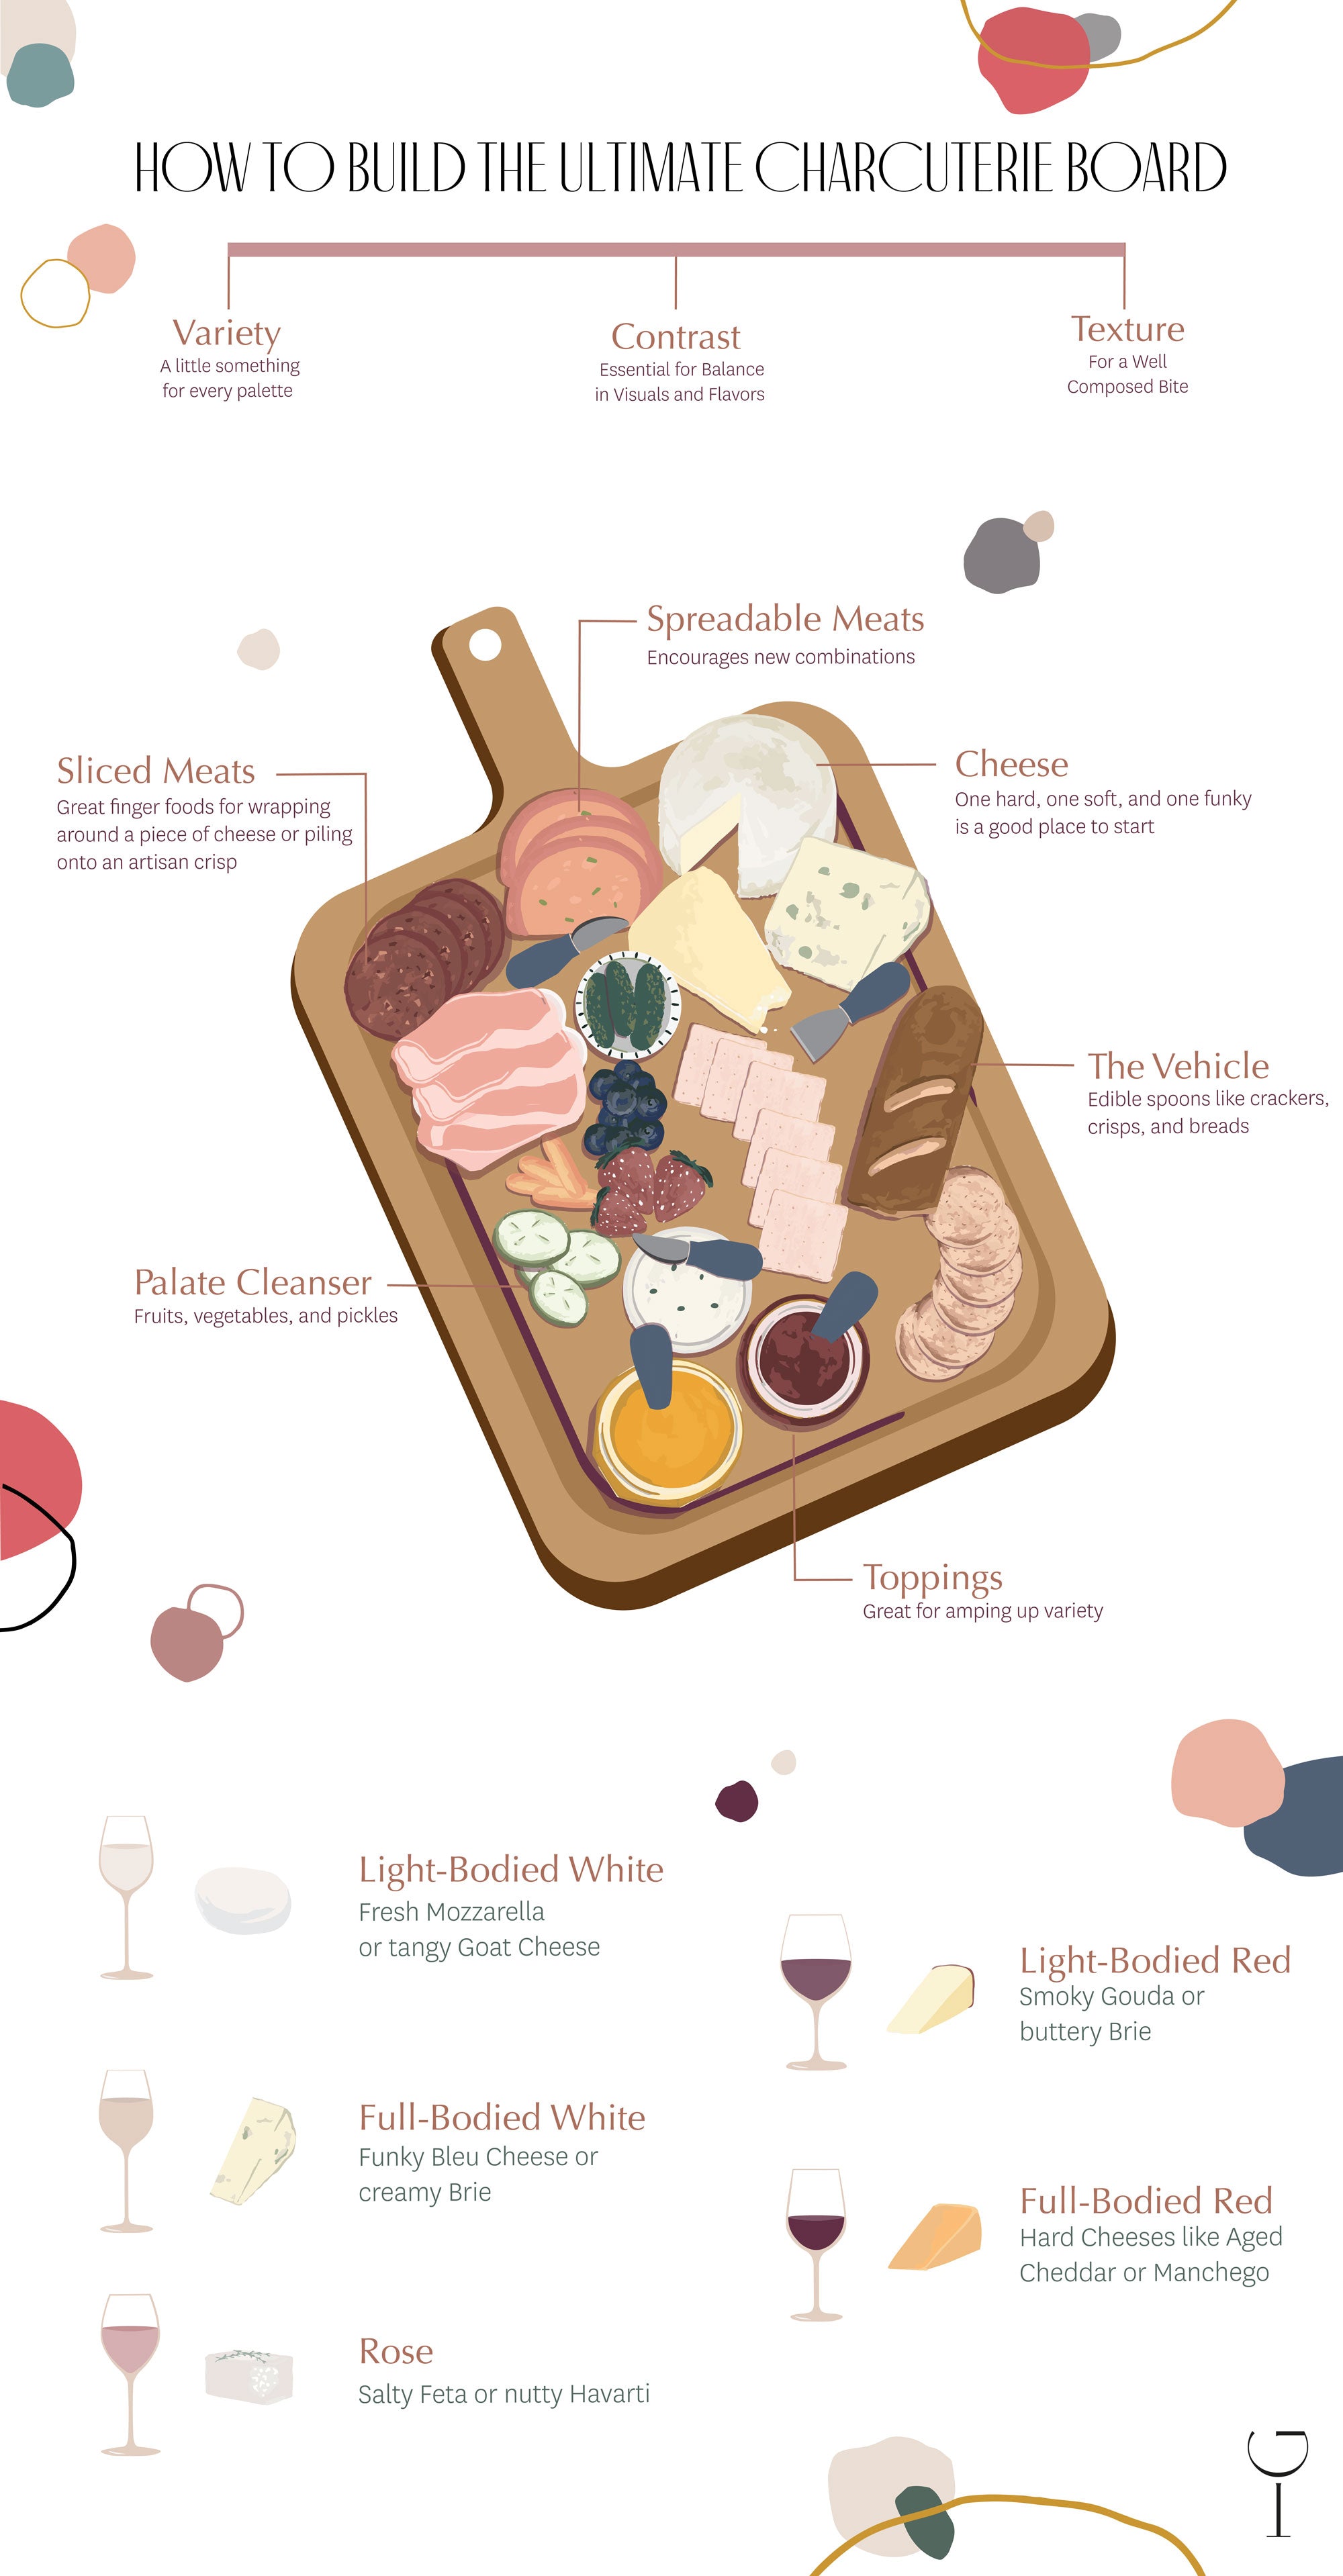 How to Build the Ultimate Charcuterie Board - Tips, Tricks and Recommended Pairings for Wine Tastings